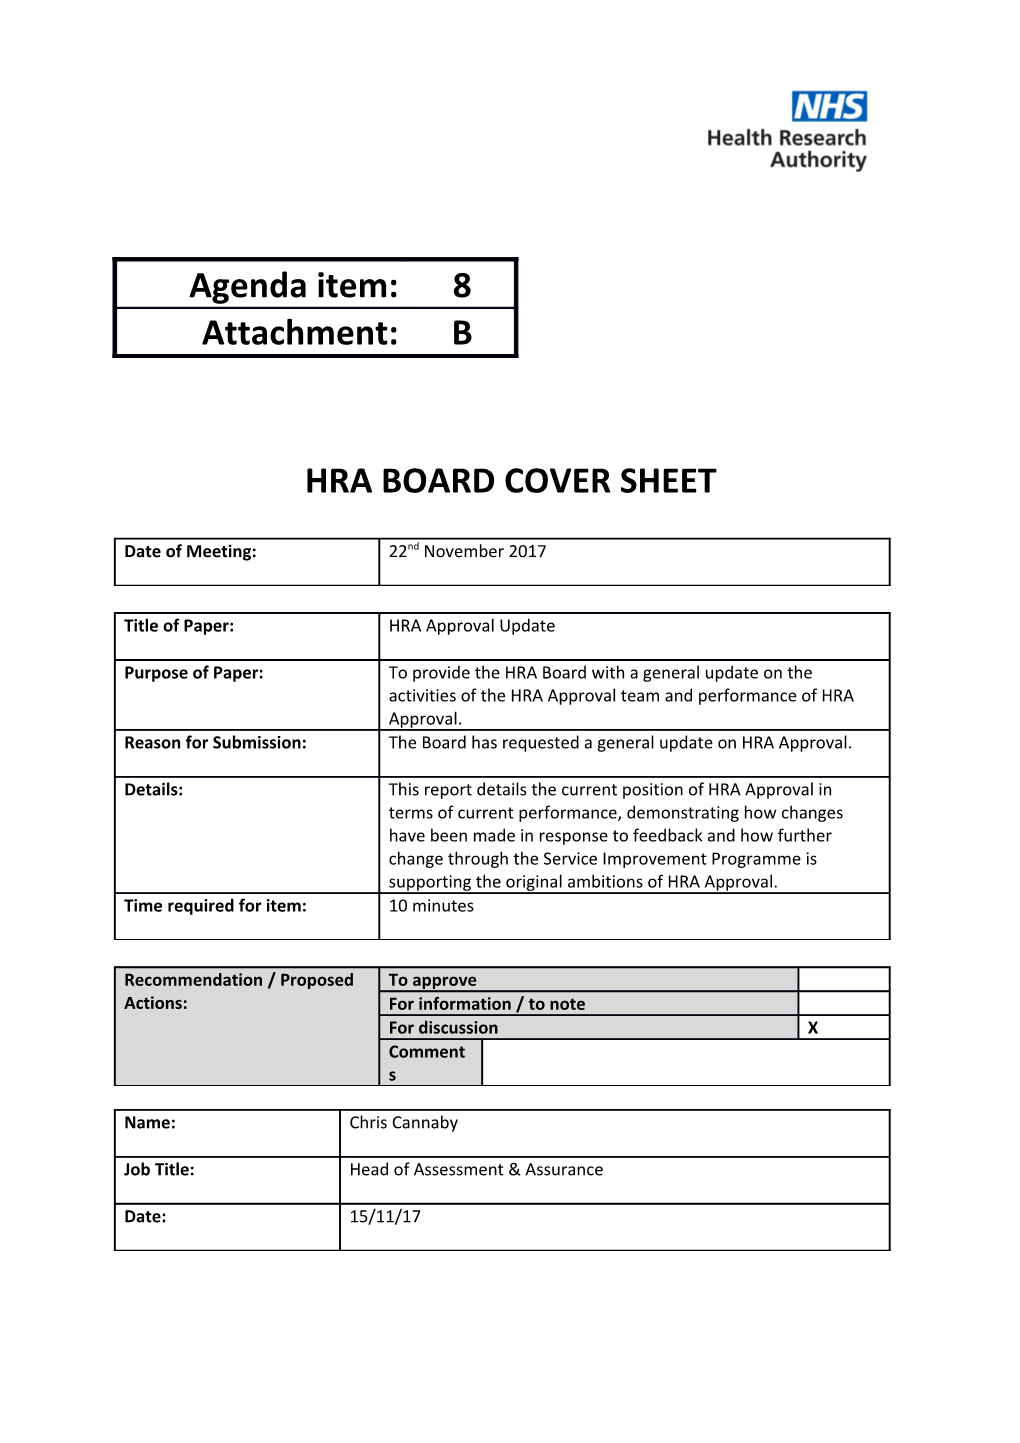 HRA Approval Update for Leadership Team and HRA Board